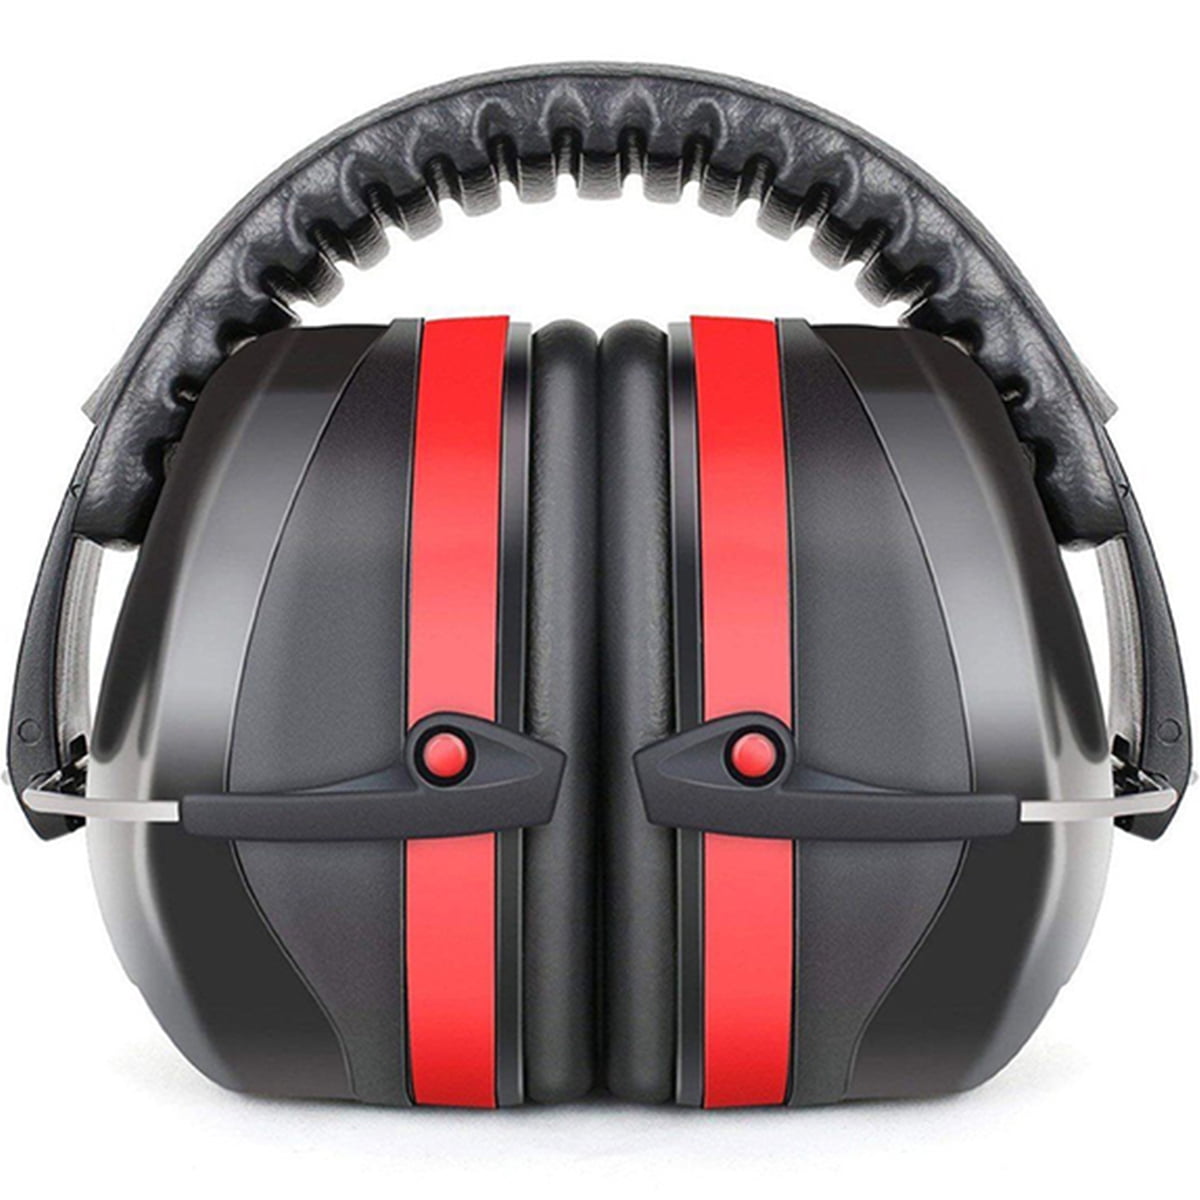 Hearing Protection Ear Muffs Shooting Ear Protection Sound Proof Earmuffs 